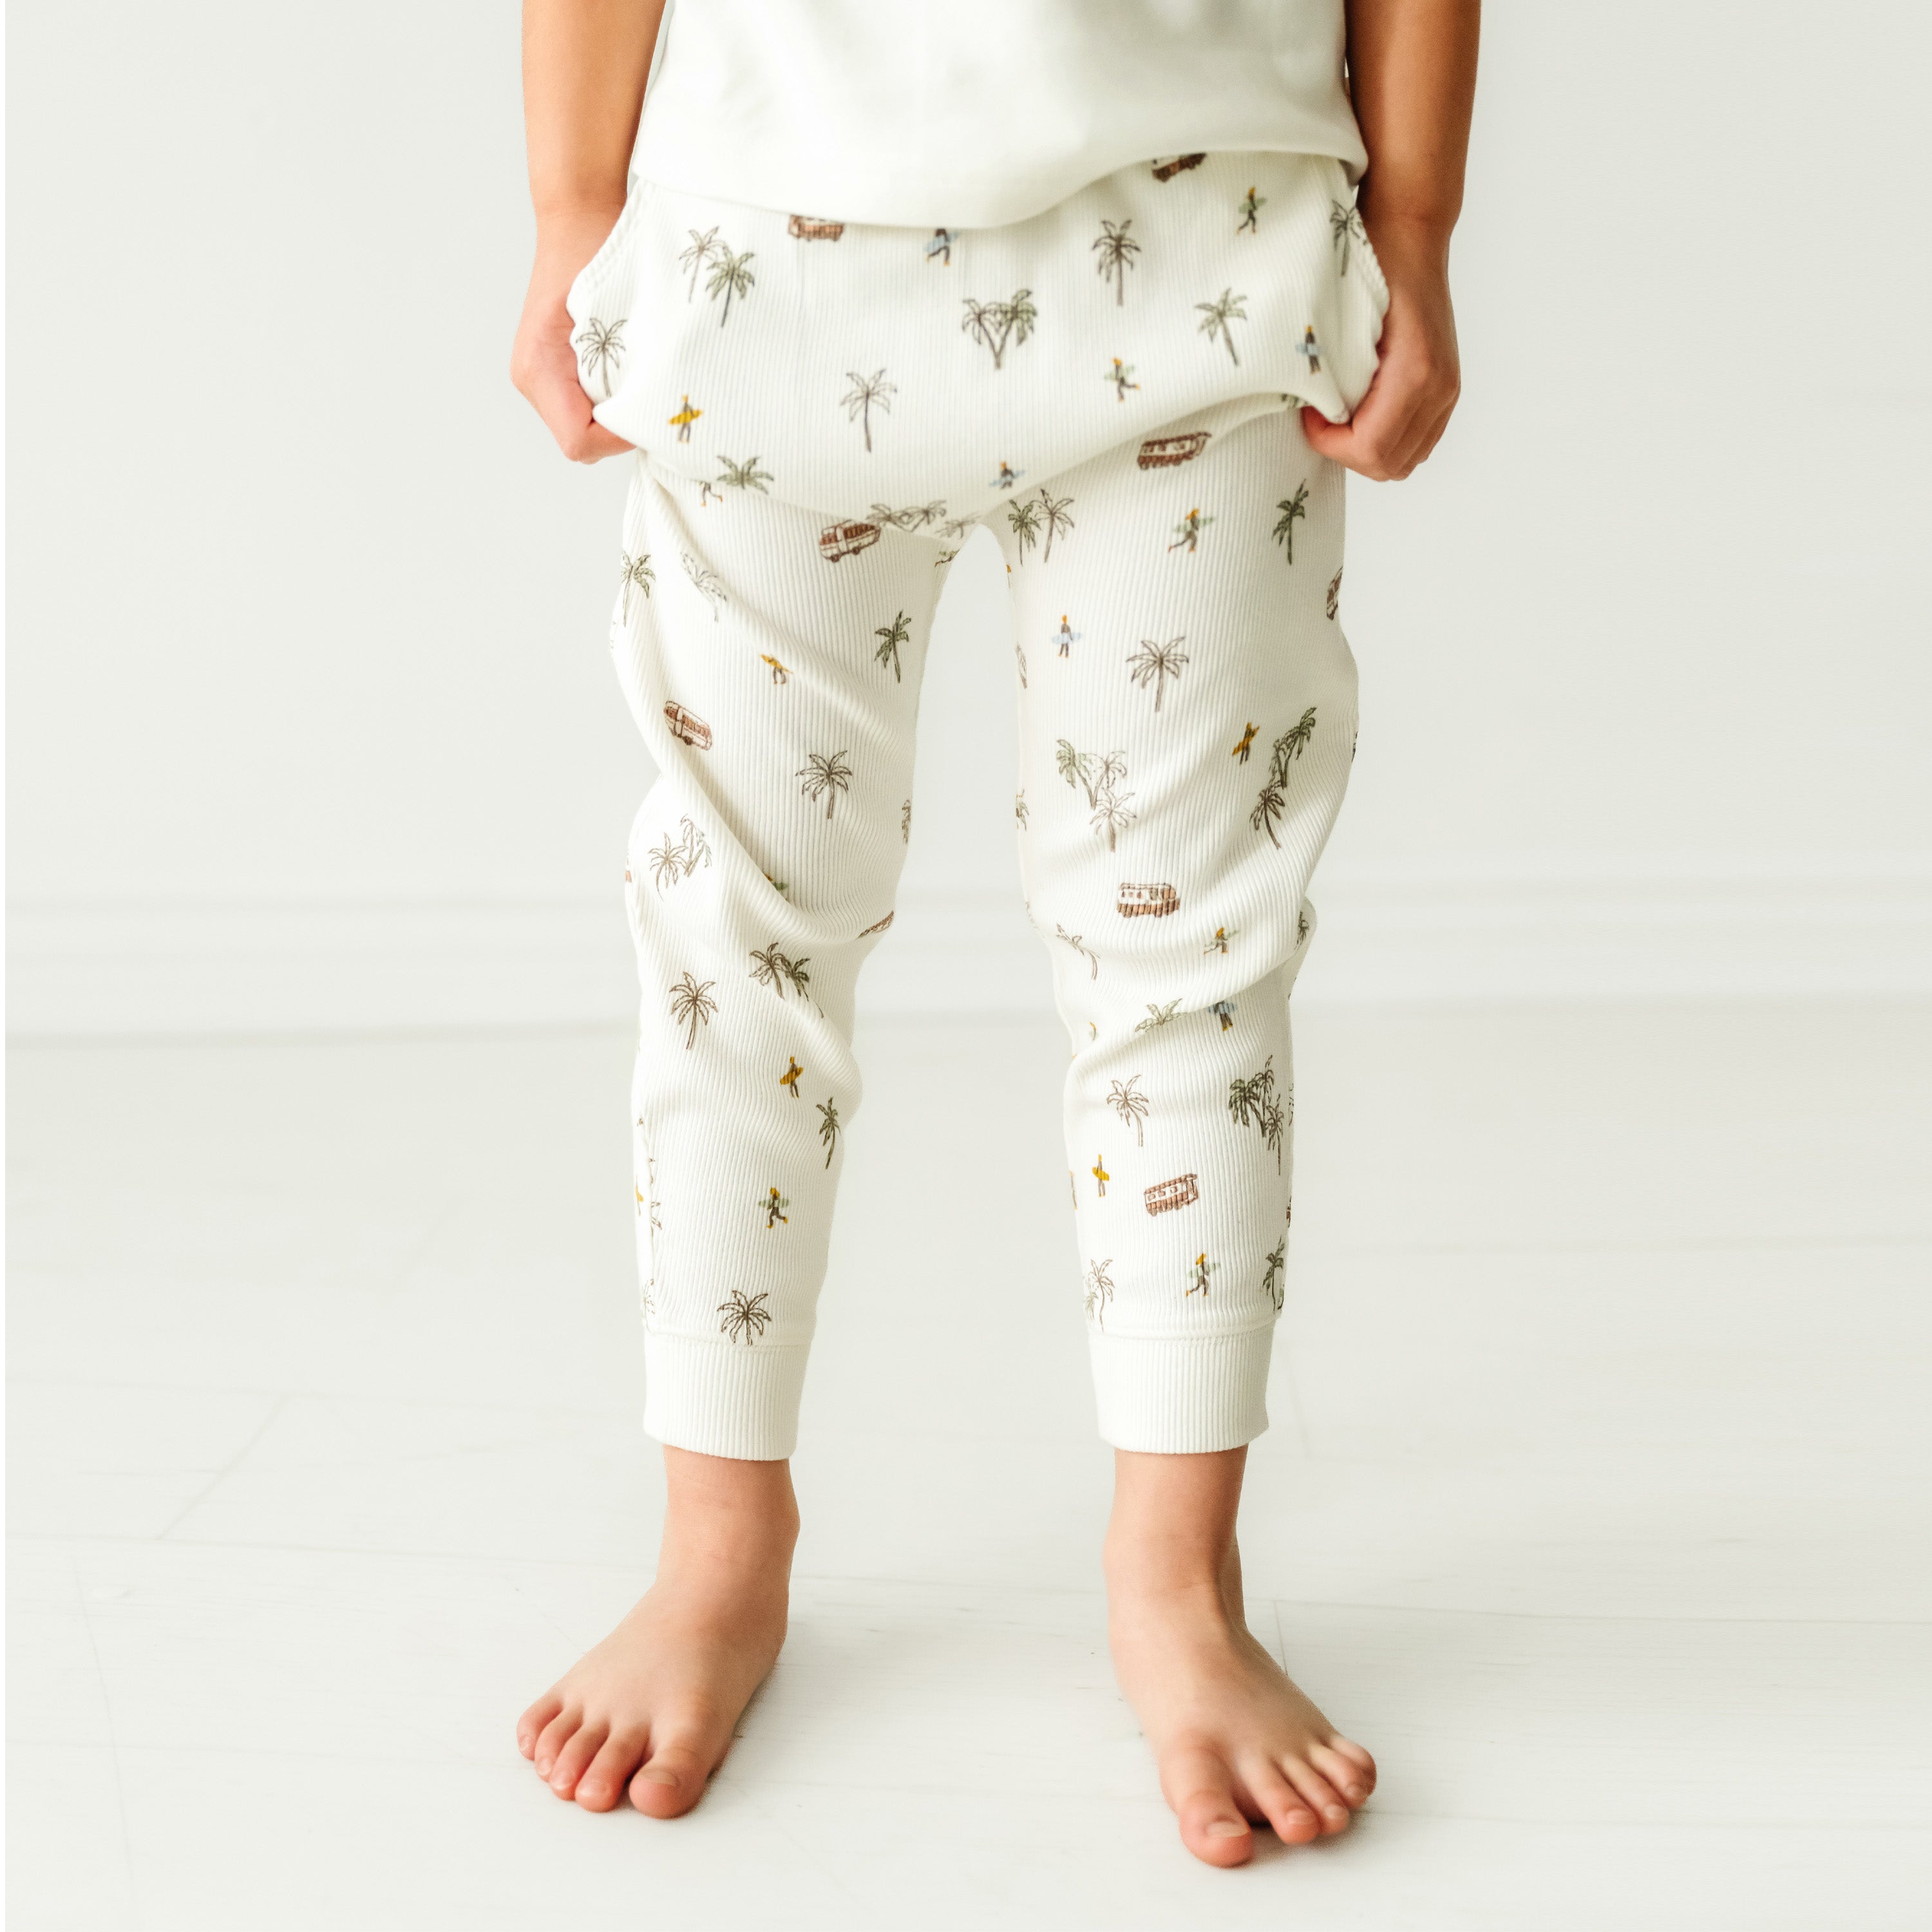 A toddler standing barefoot wearing white pajamas with a whimsical pattern of stars and subtle earth-toned designs. The focus is on the Organic Harem Pants - Malibu by Makemake Organics and the child's lower torso and legs.